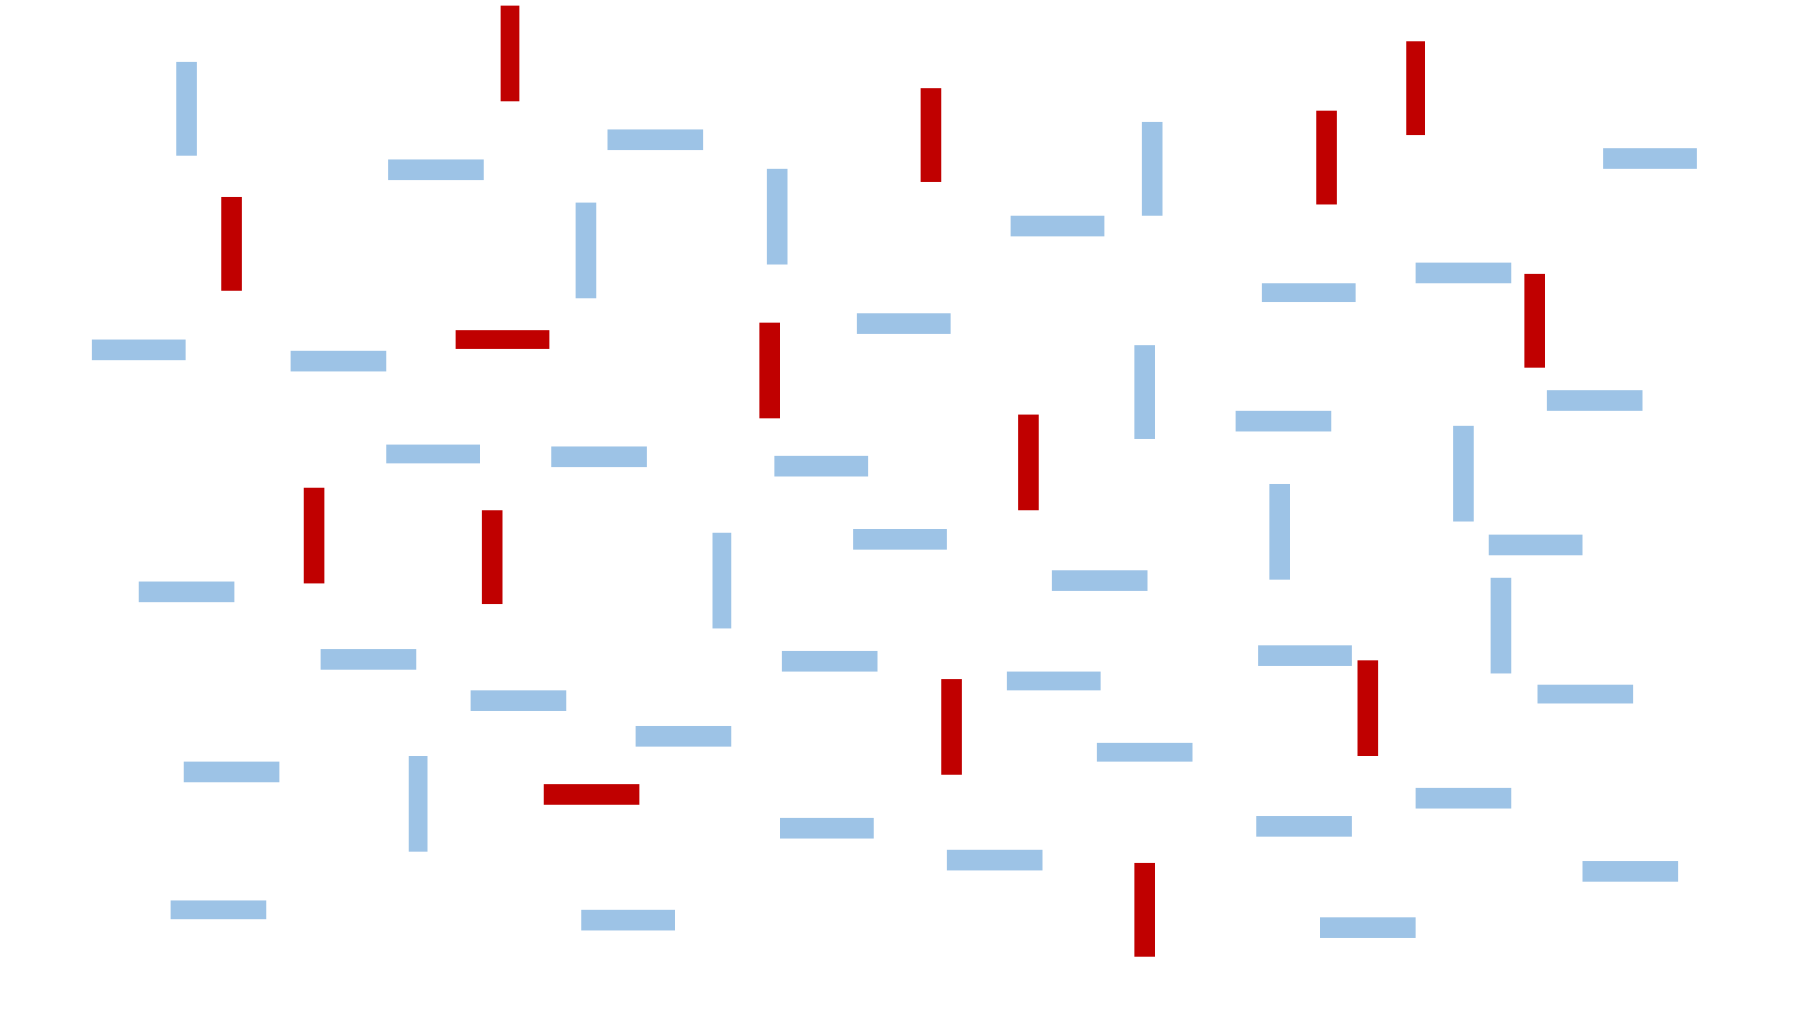 Red and blue bars, both horizontal and vertical.